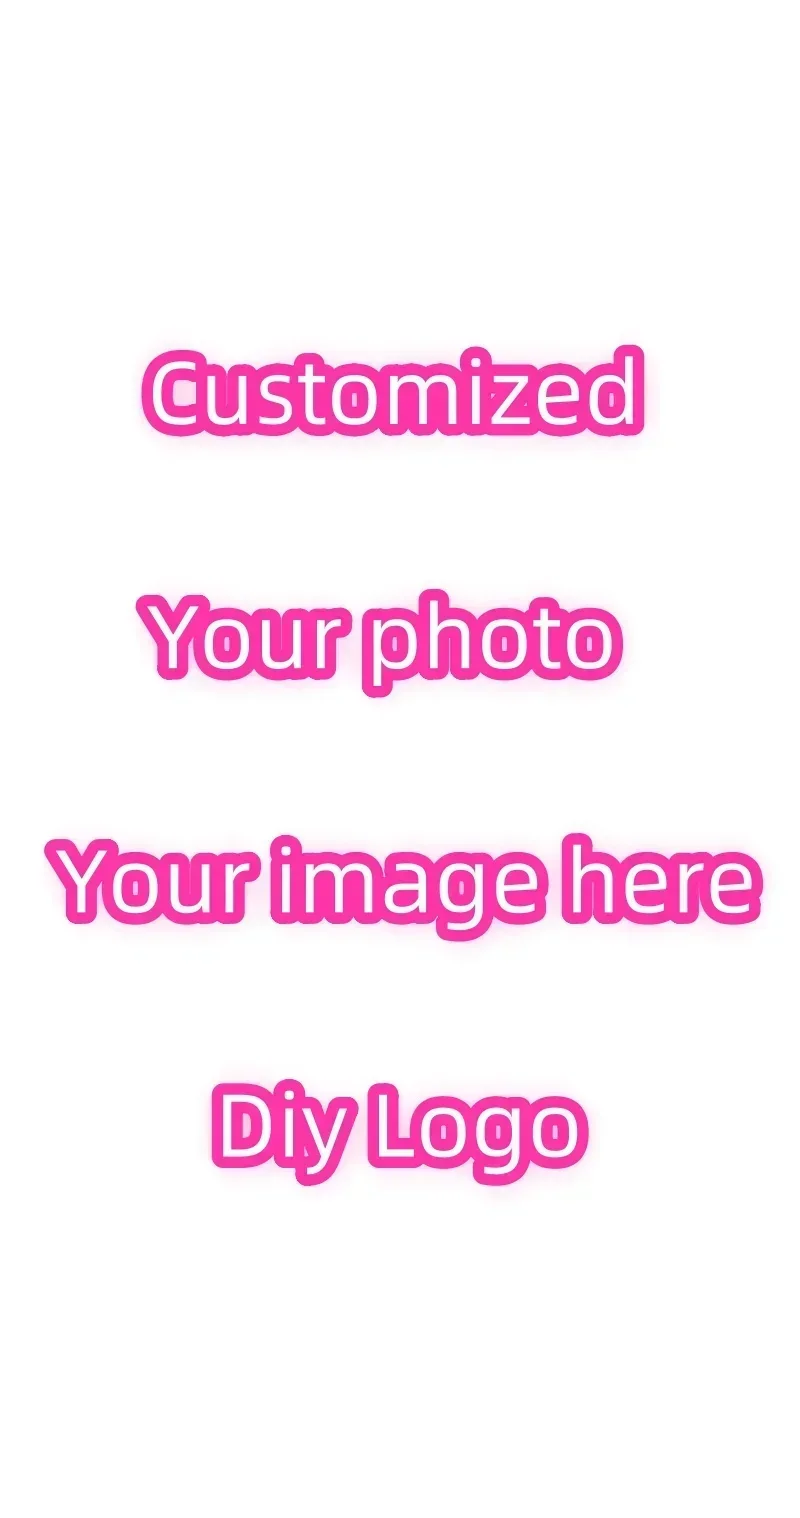 Customize Photo Logo Brand Blanket 3D Printing DIY Your Pictures Custom Soft Comfortable Blanket Home Decorate Sofa Blanket